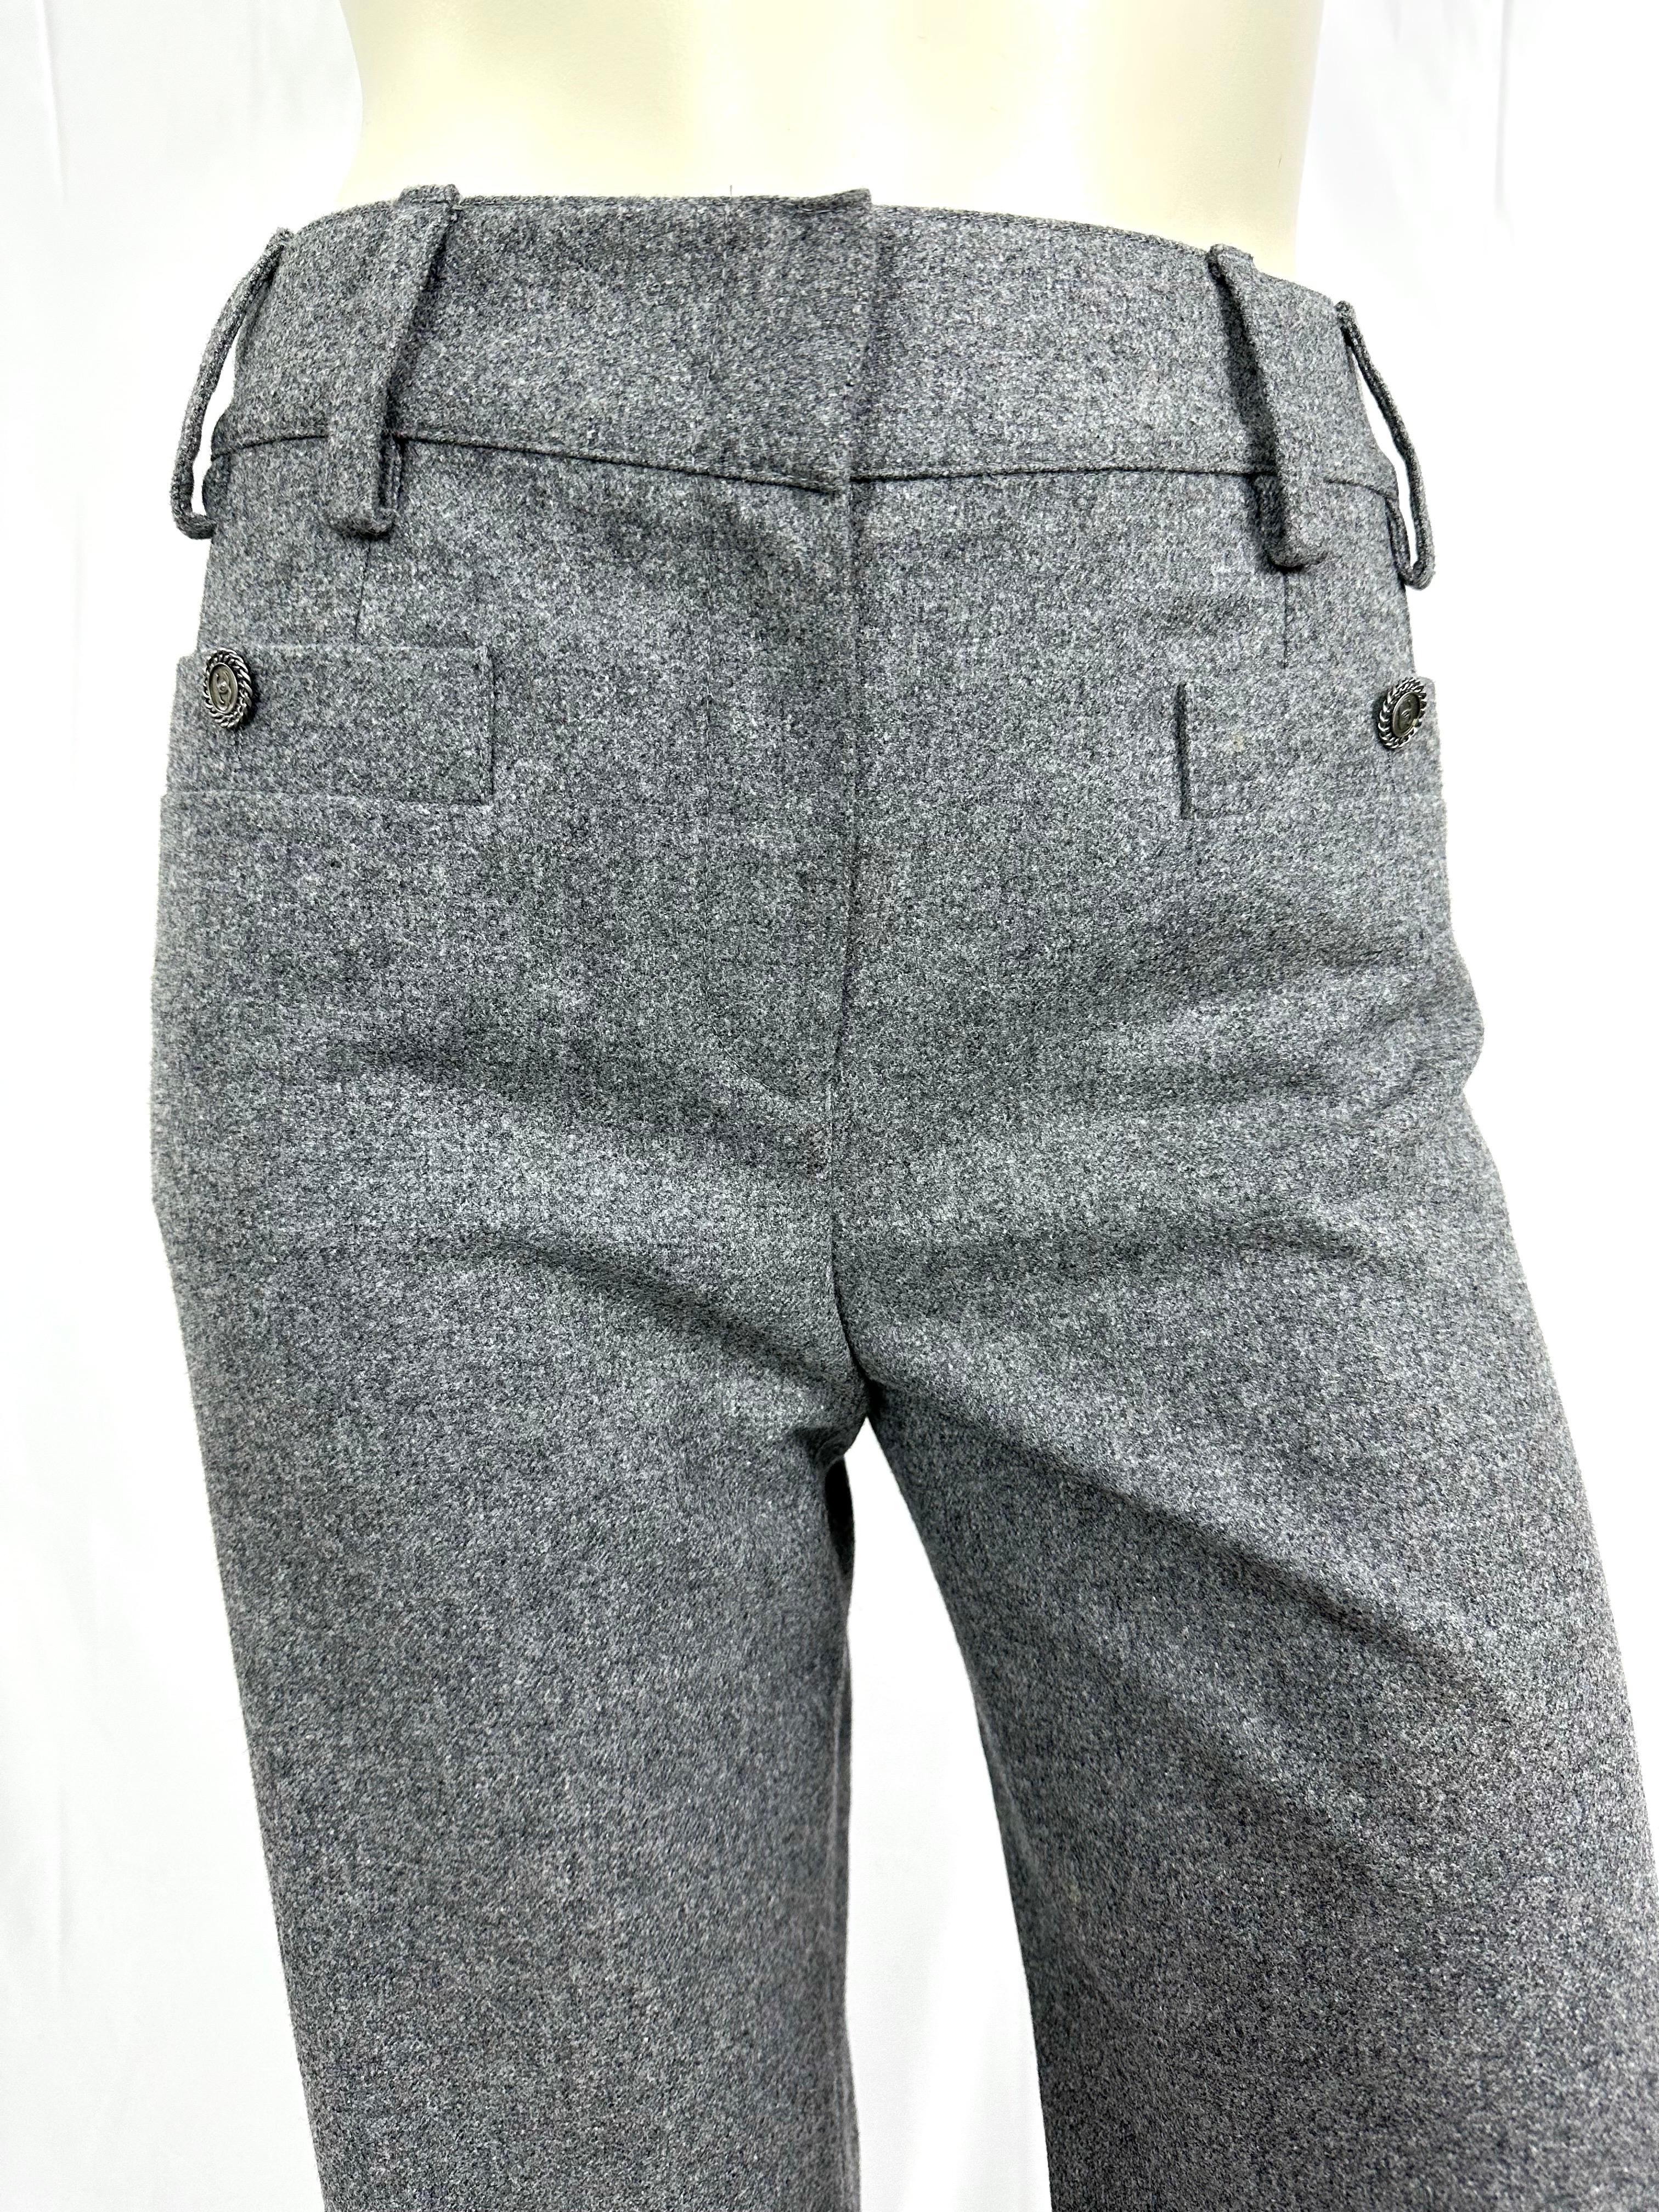 Elegant Chanel pants in gray wool from the 05A collection, mid-high waist with a straight cut.
2 small pockets at the front and at the back with a chanel button in silver metal and the CC logo interlaced in the center.
Fully lined in gray silk.
Zip